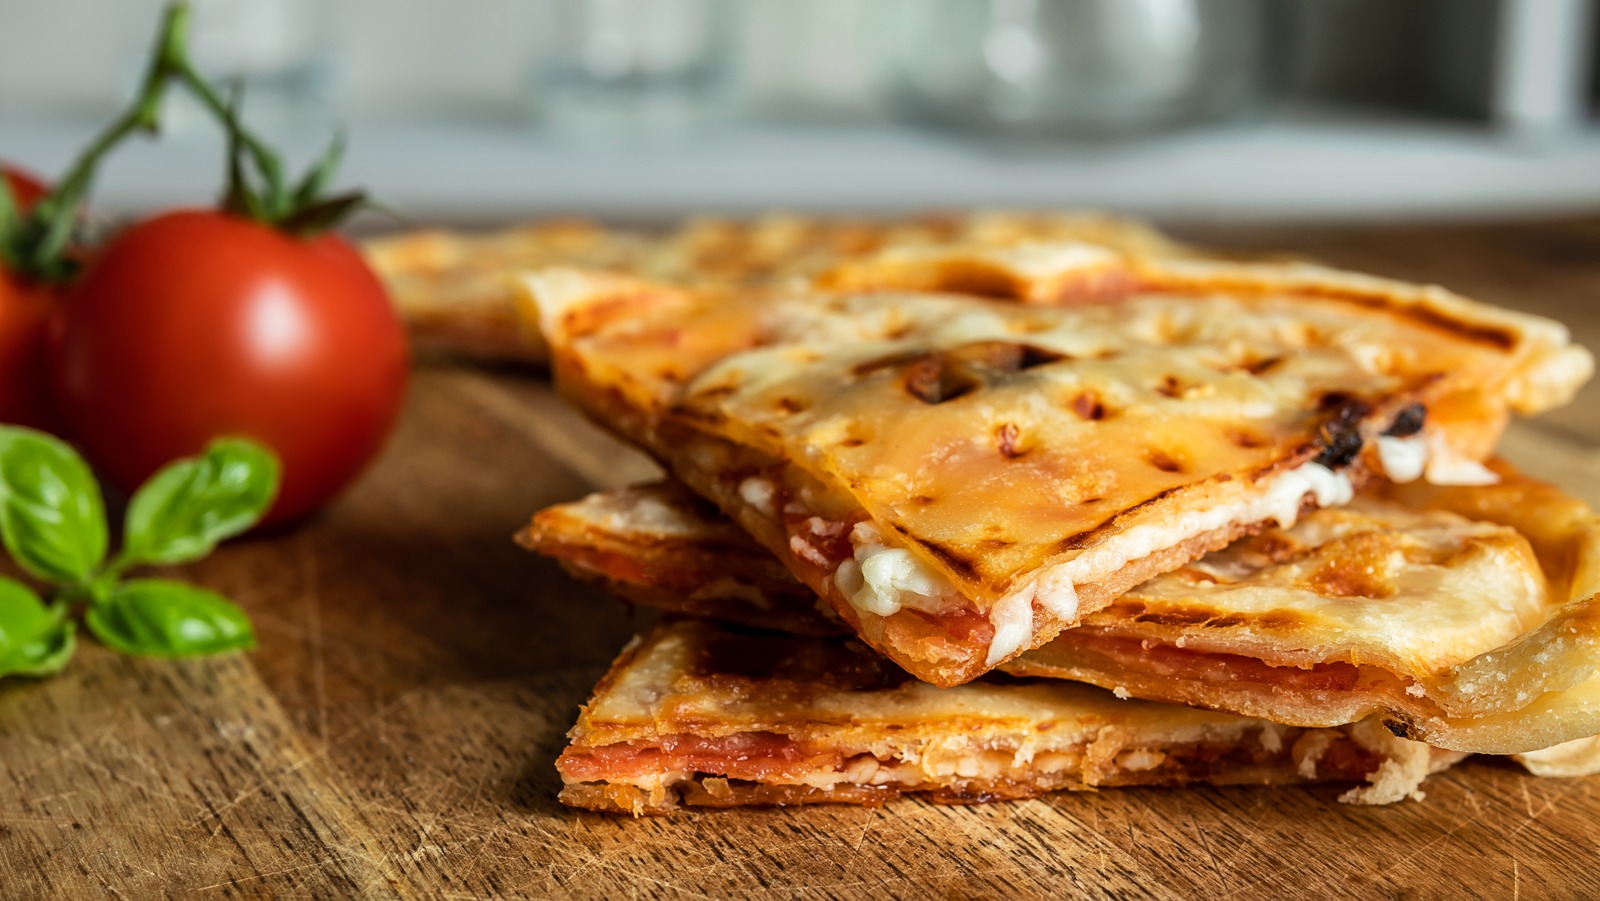 Give leftover pizza the waffle iron treatment for a crispier slice